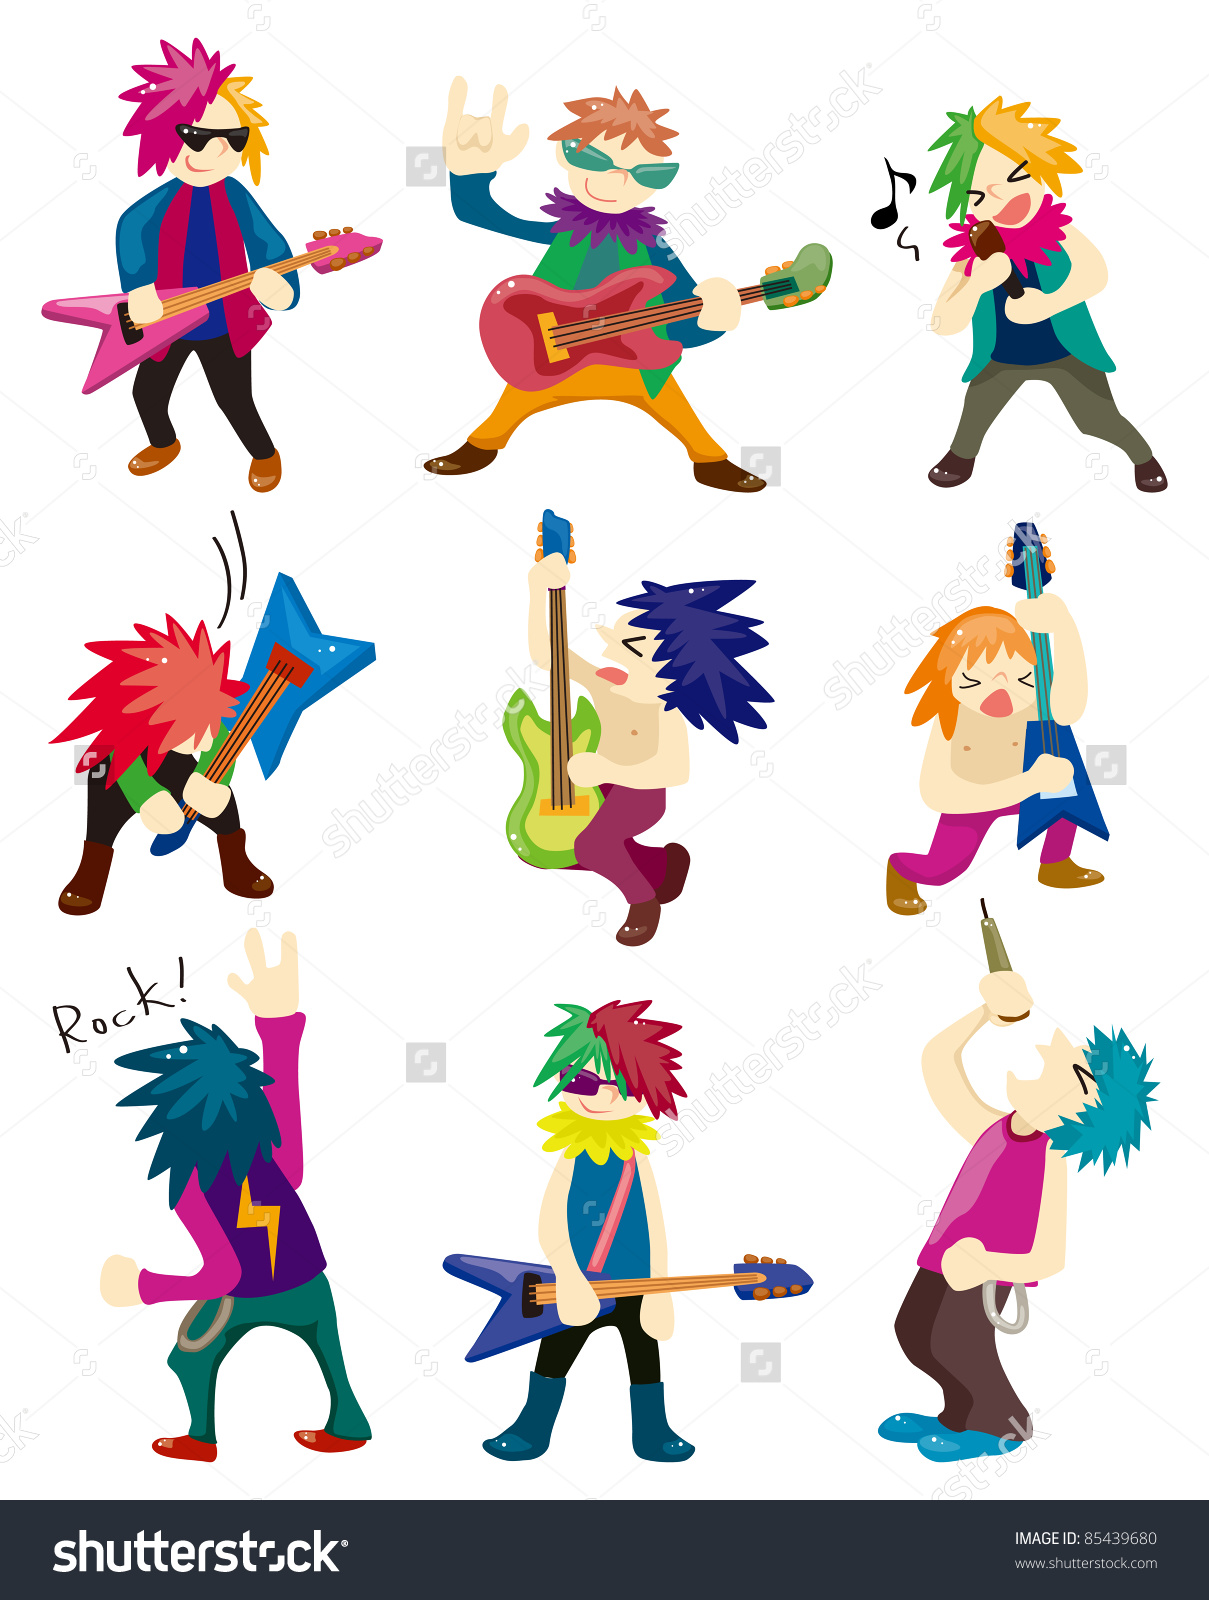 Showing post & media for Cartoon hard rock clipart.